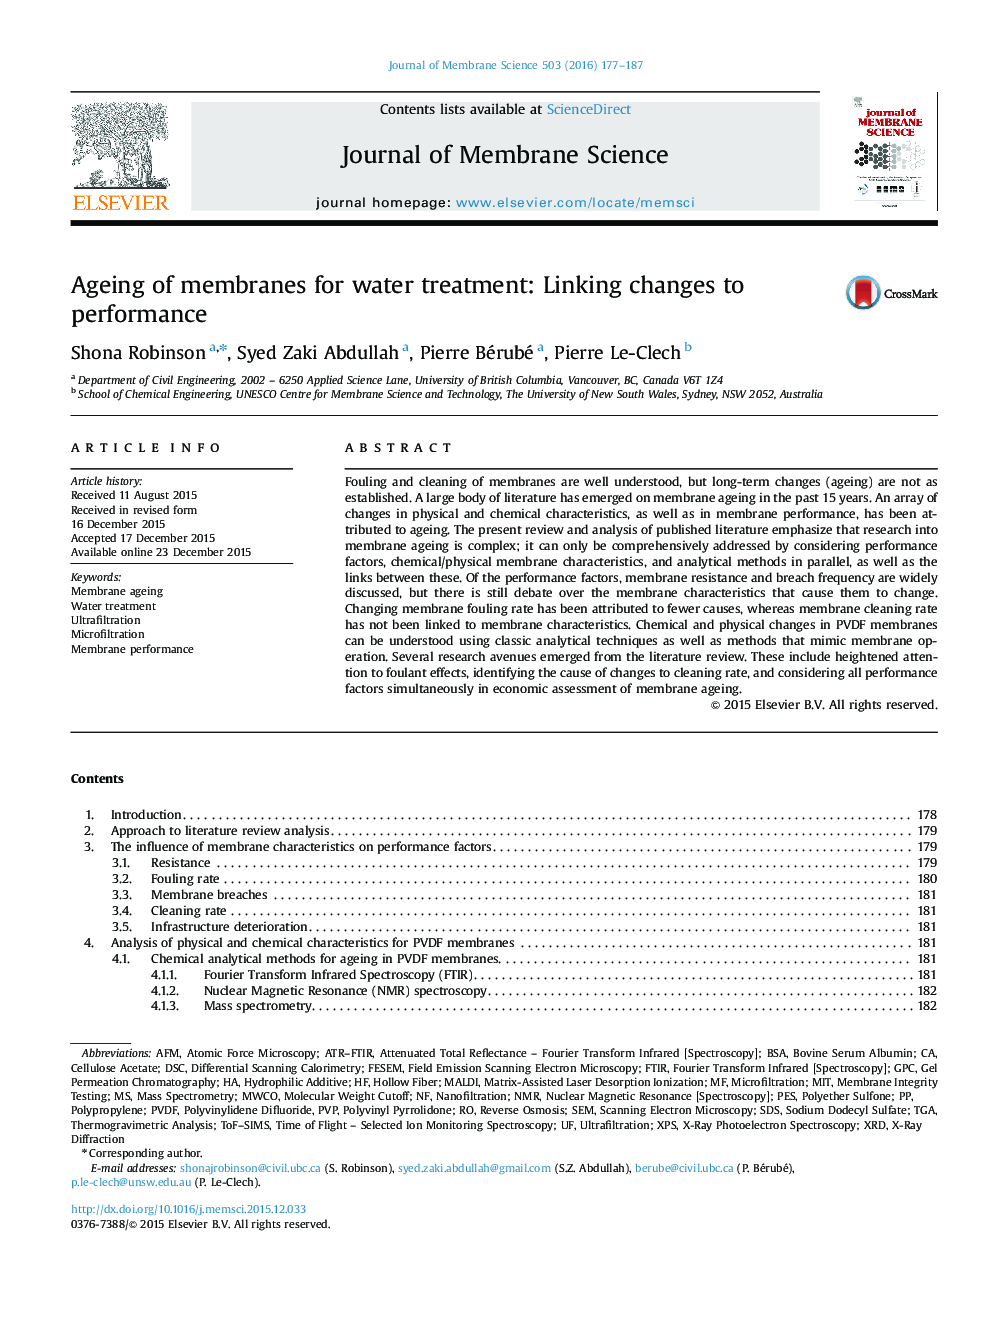 Ageing of membranes for water treatment: Linking changes to performance